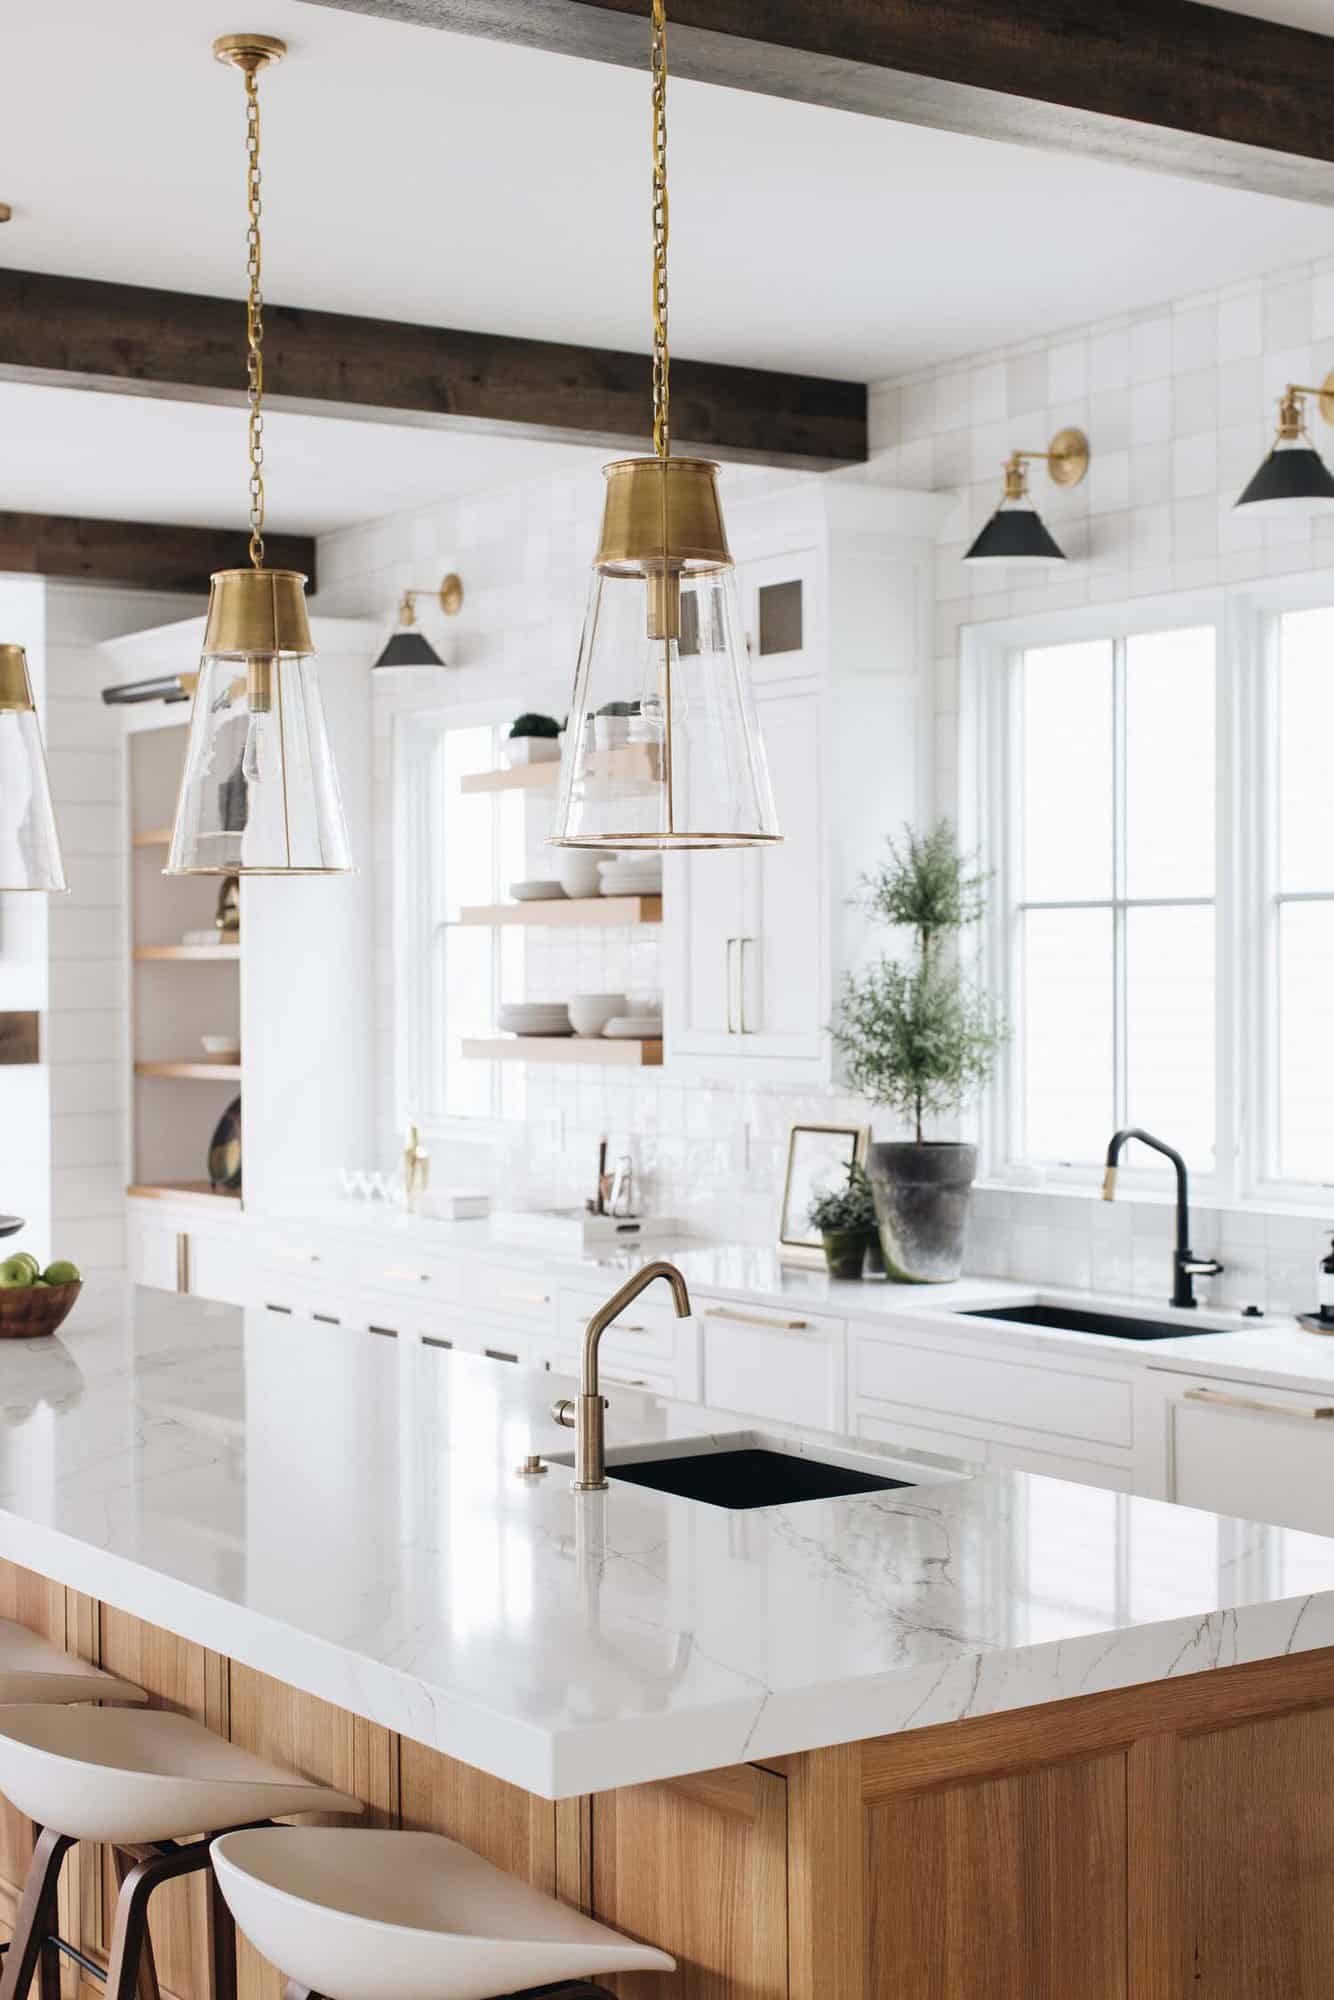 beach style kitchen island detail with pendant lights